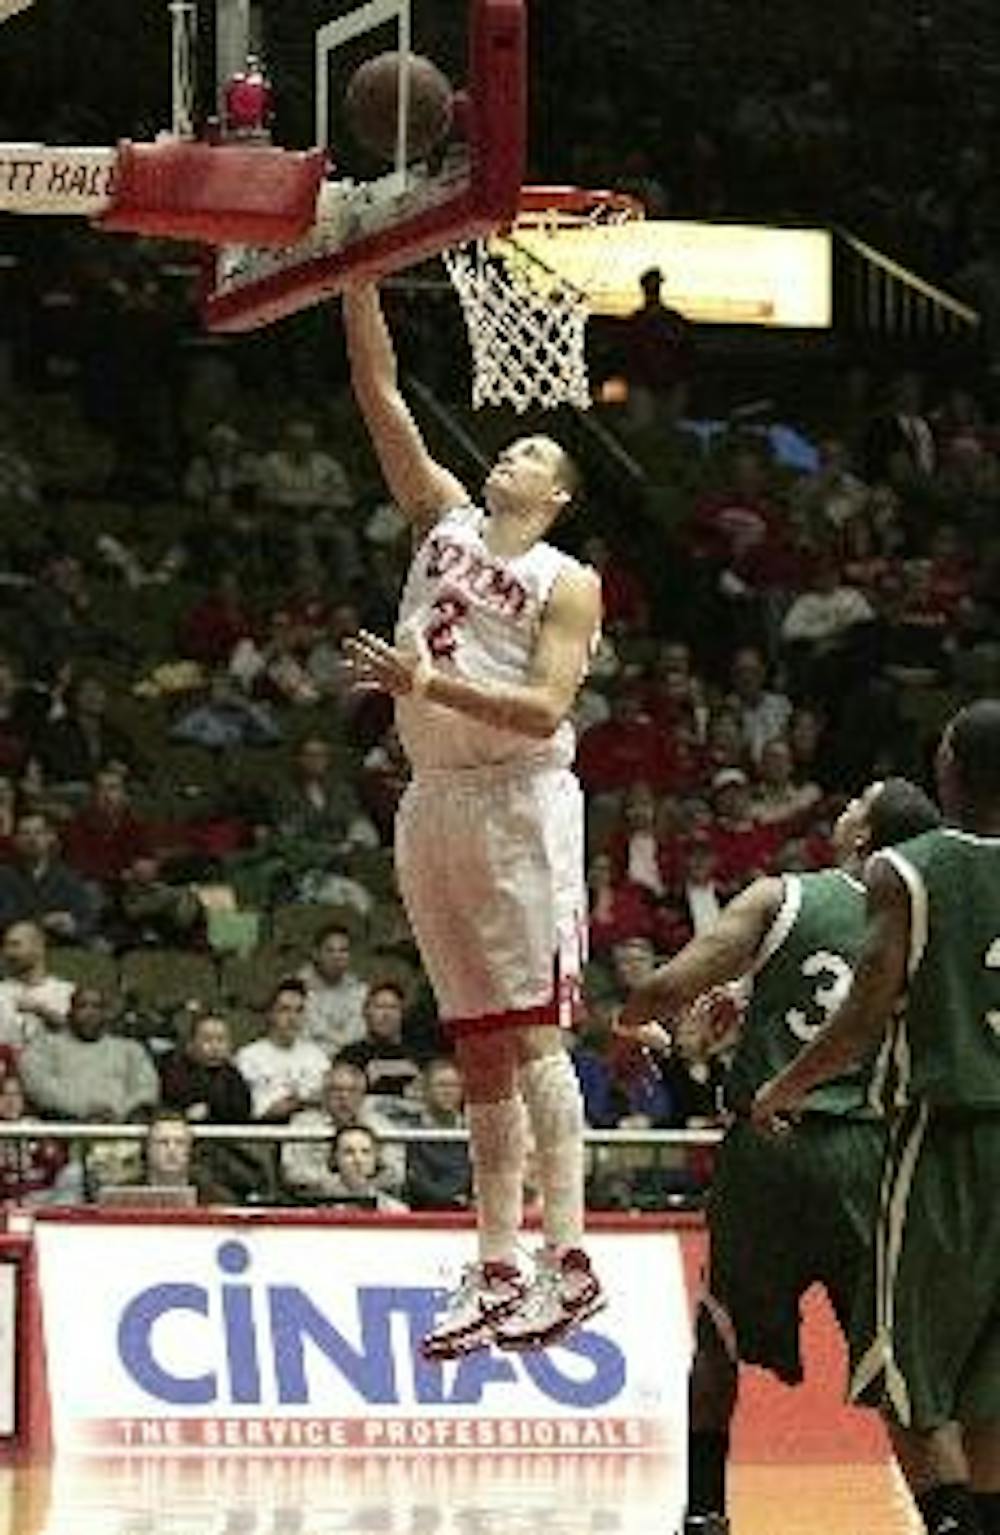 Miami's Tyler Dierkers goes up for an easy basket Saturday evening at Millett Hall. The RedHawks recorded their second MAC win of the season, 65-52.